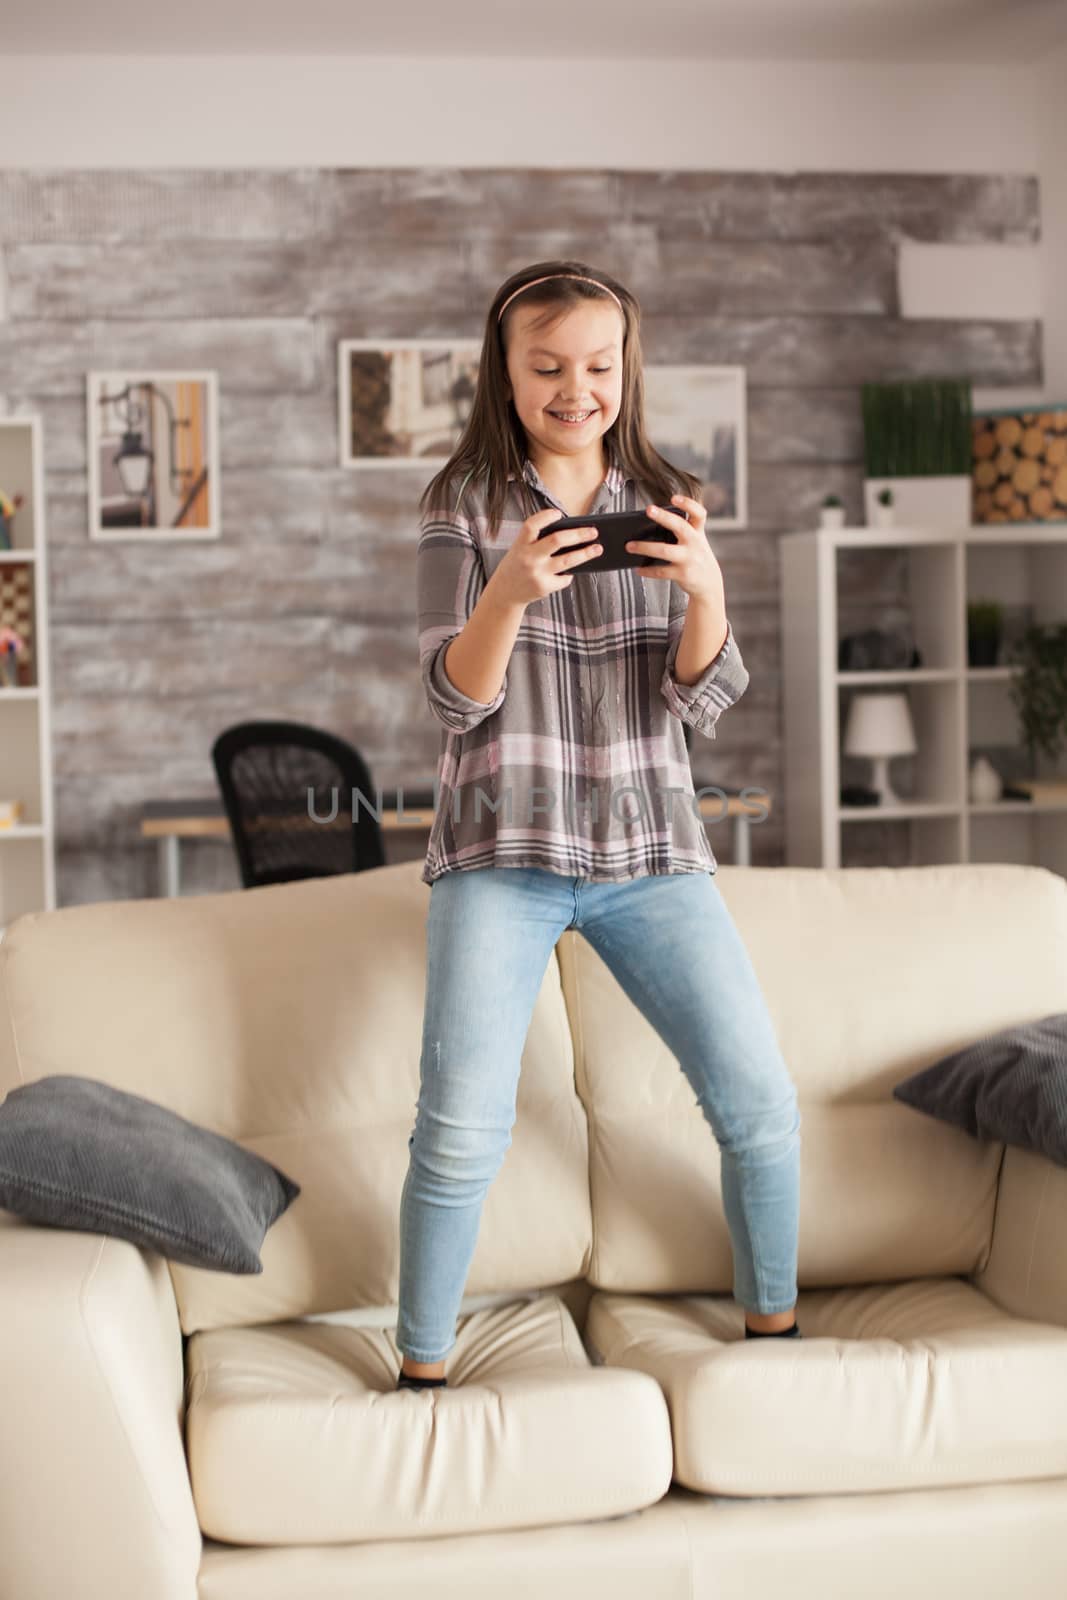 Little girl playing games on smartphones by DCStudio